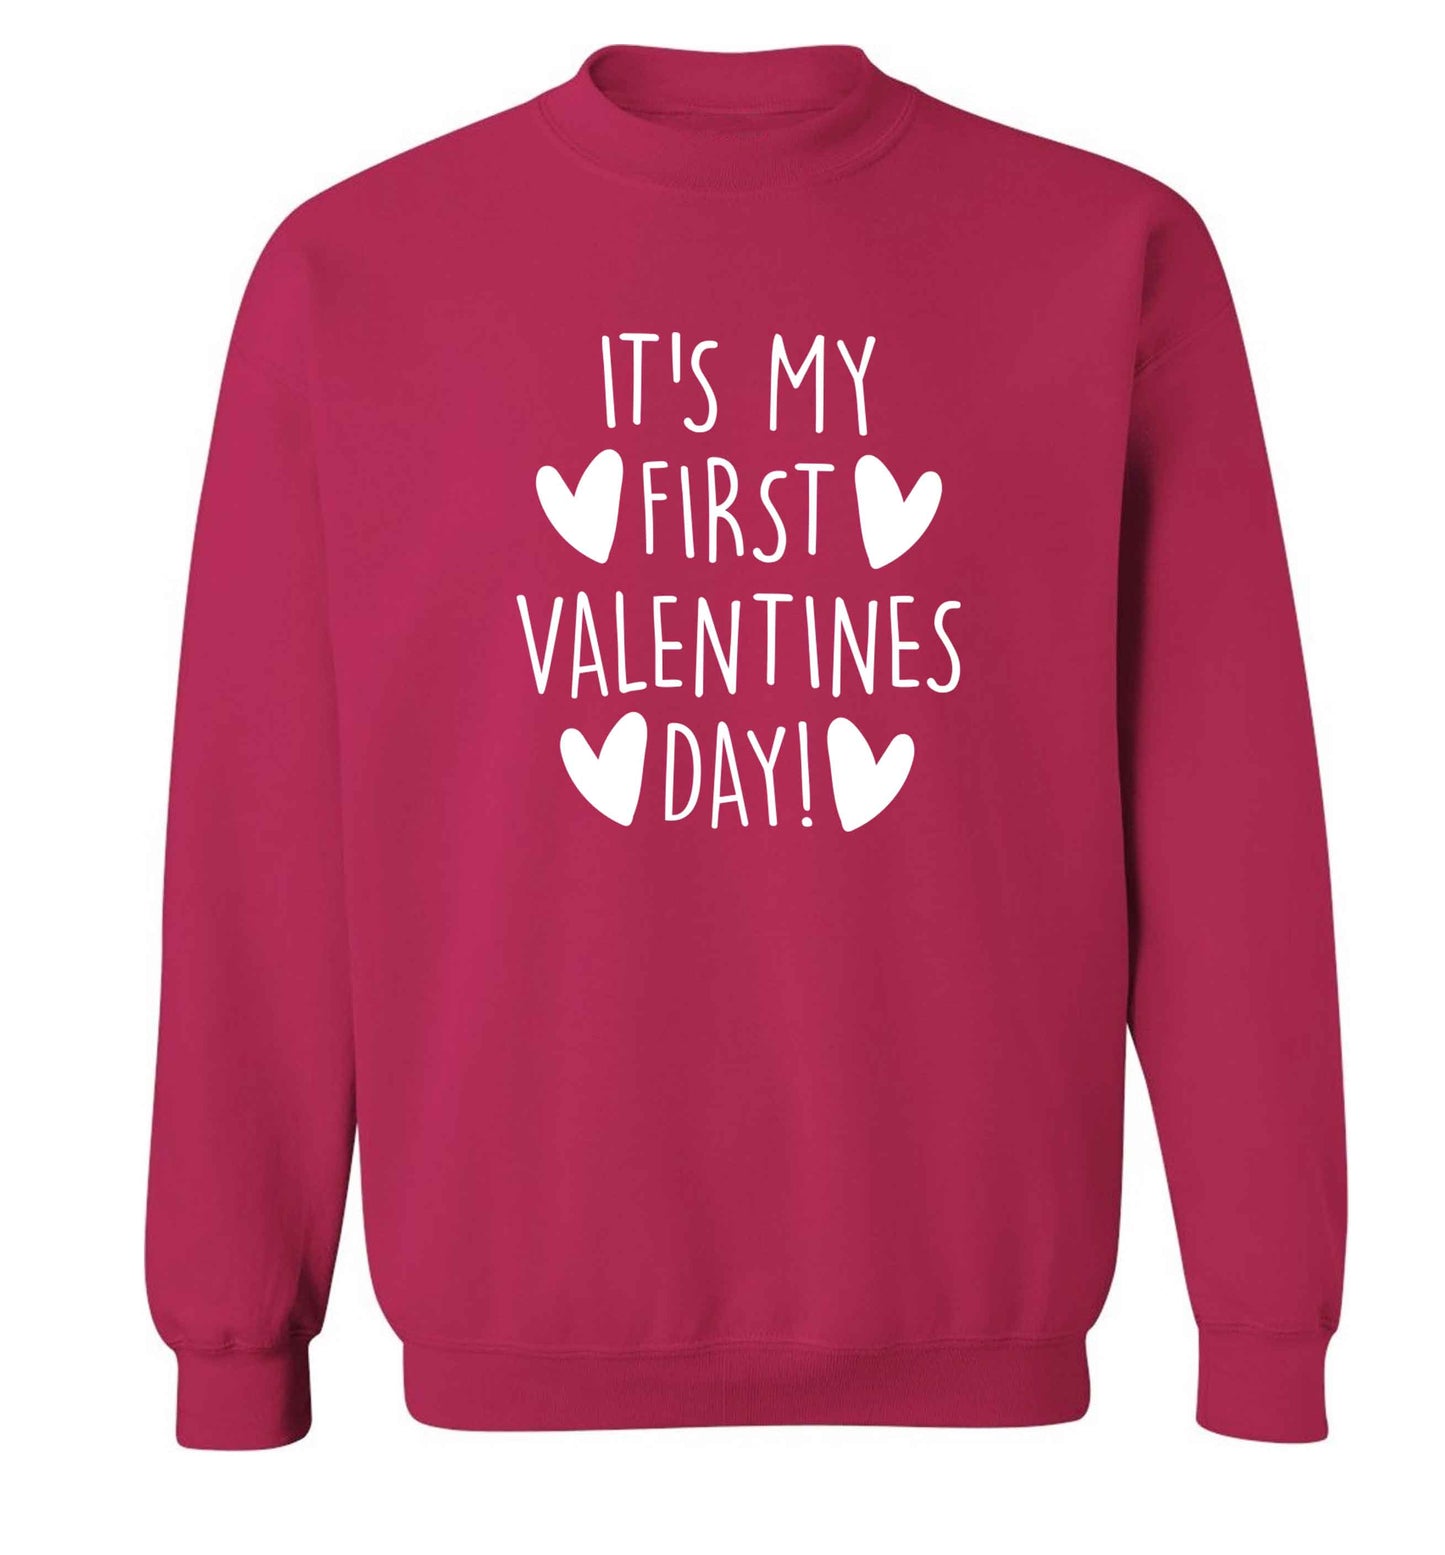 It's my first valentines day! adult's unisex pink sweater 2XL